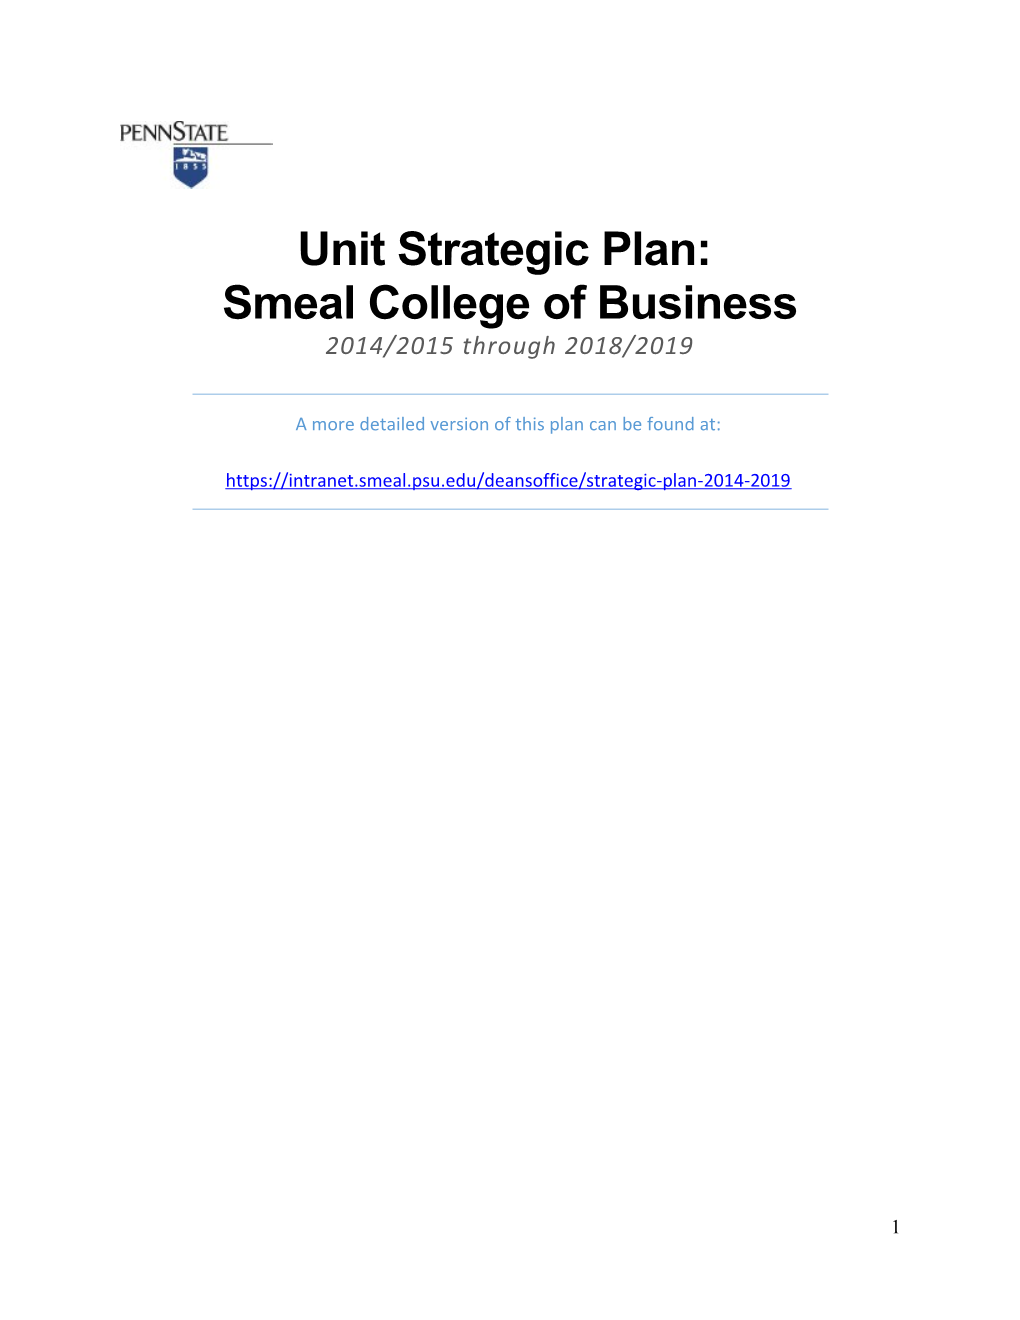 Penn State Smeal College of Business Strategic Plan